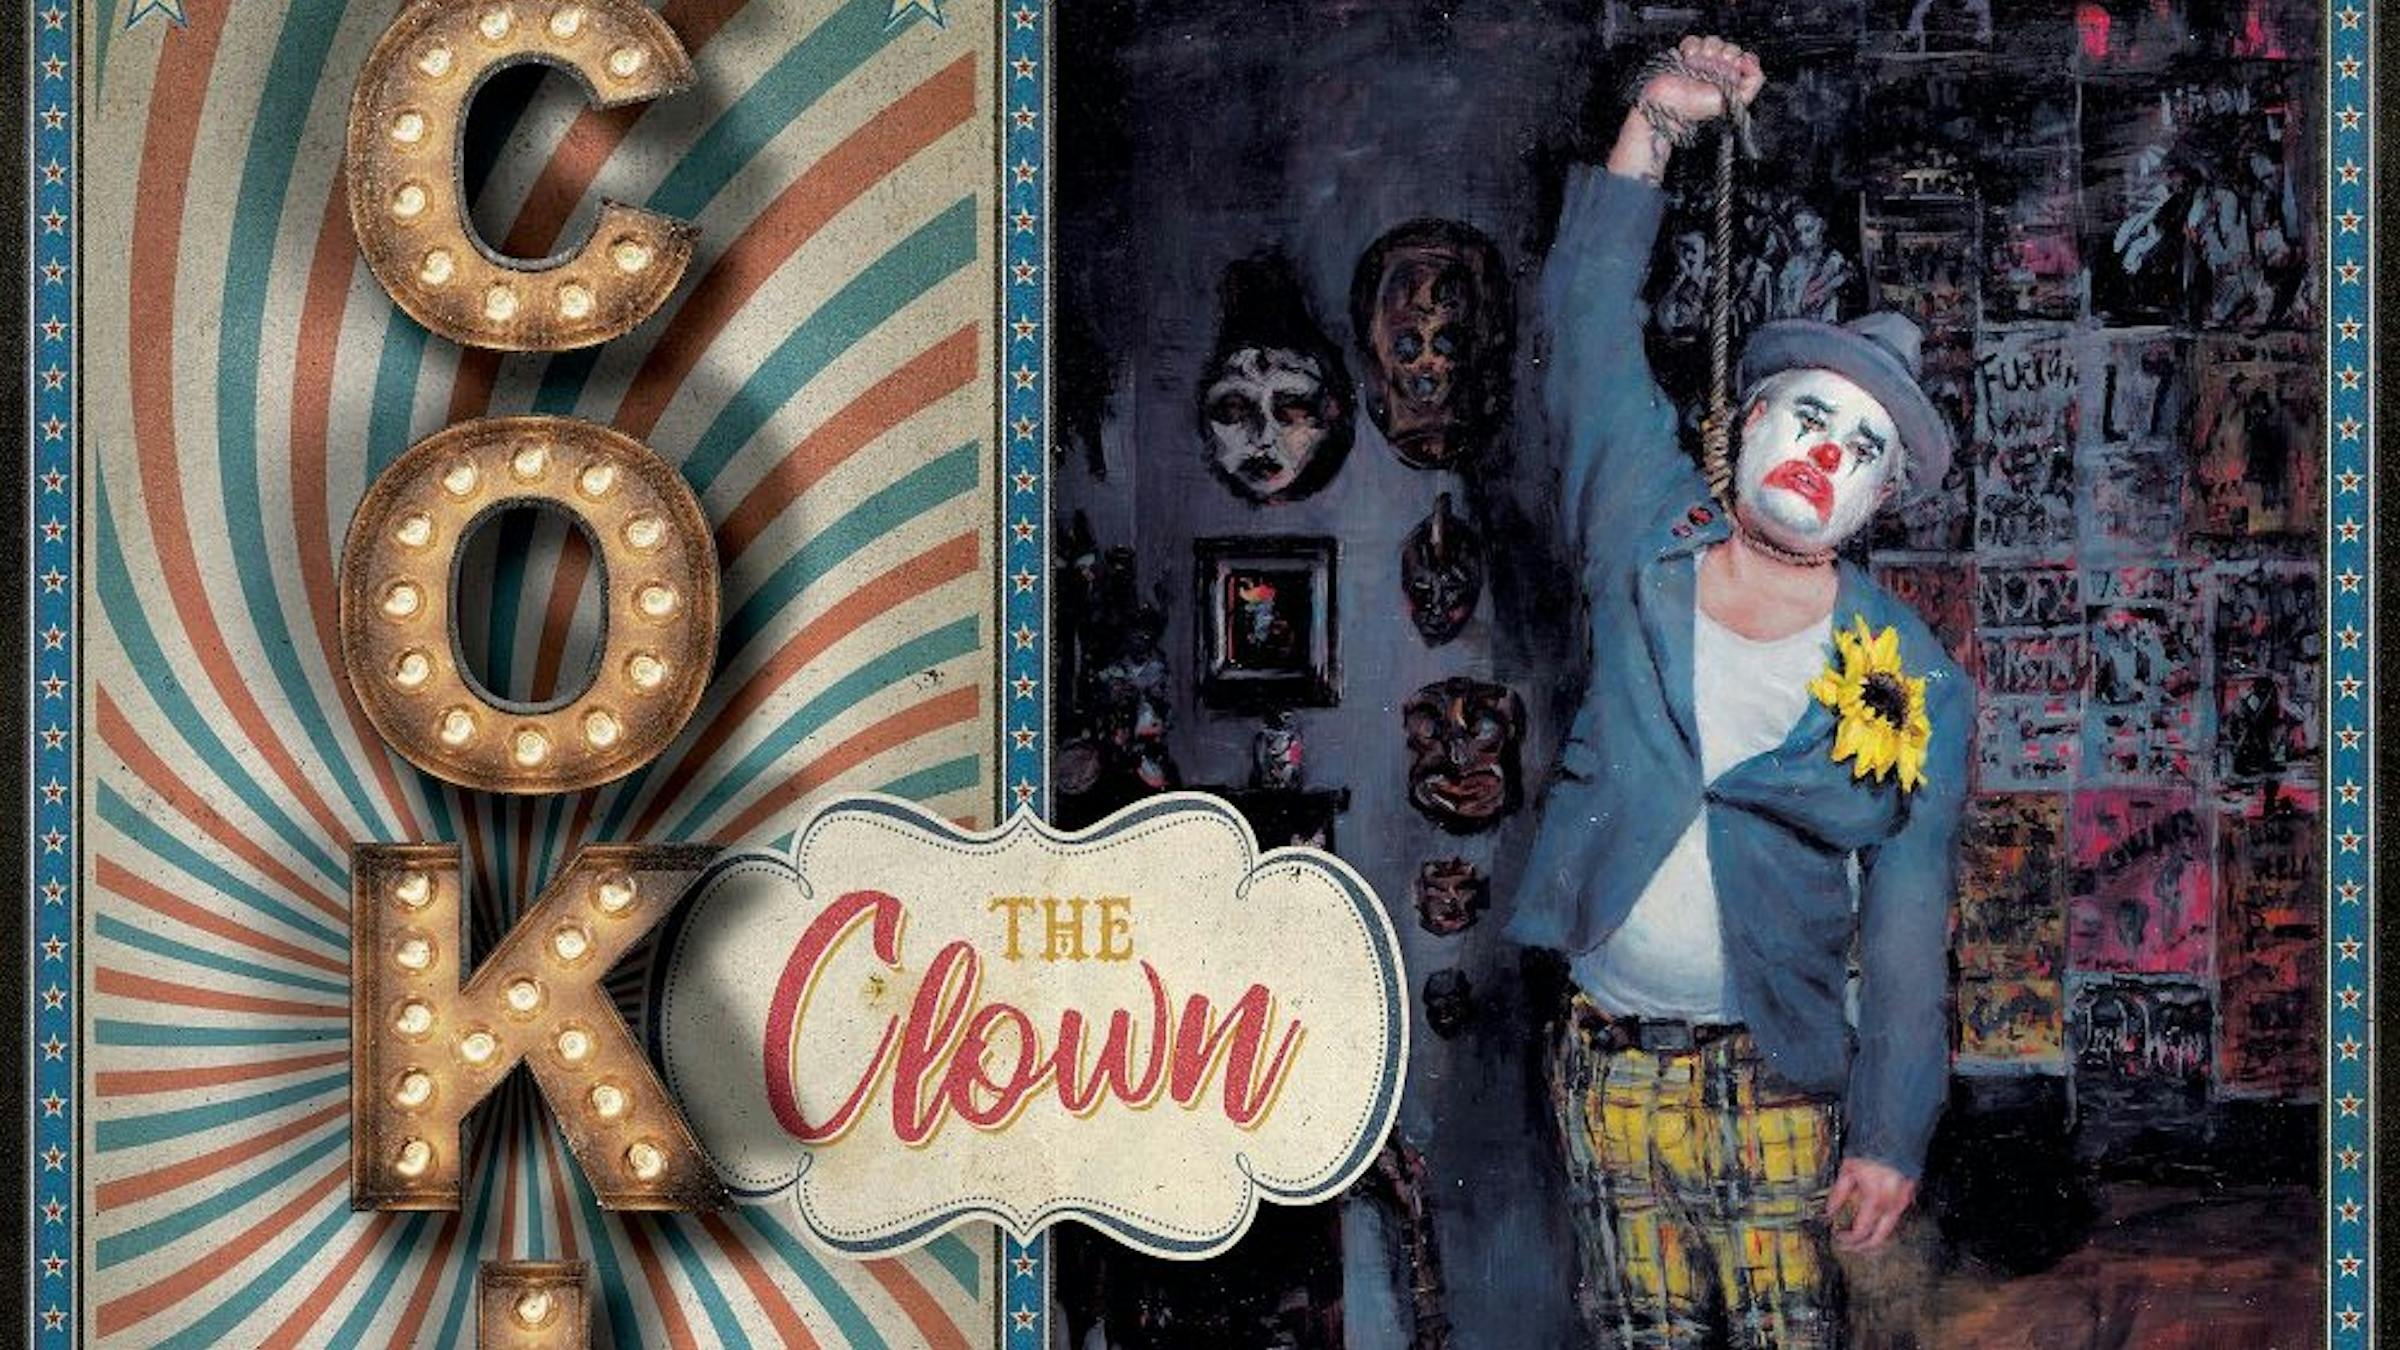 Cokie The Clown (NOFX's Fat Mike) Releases New Single Featuring Travis Barker